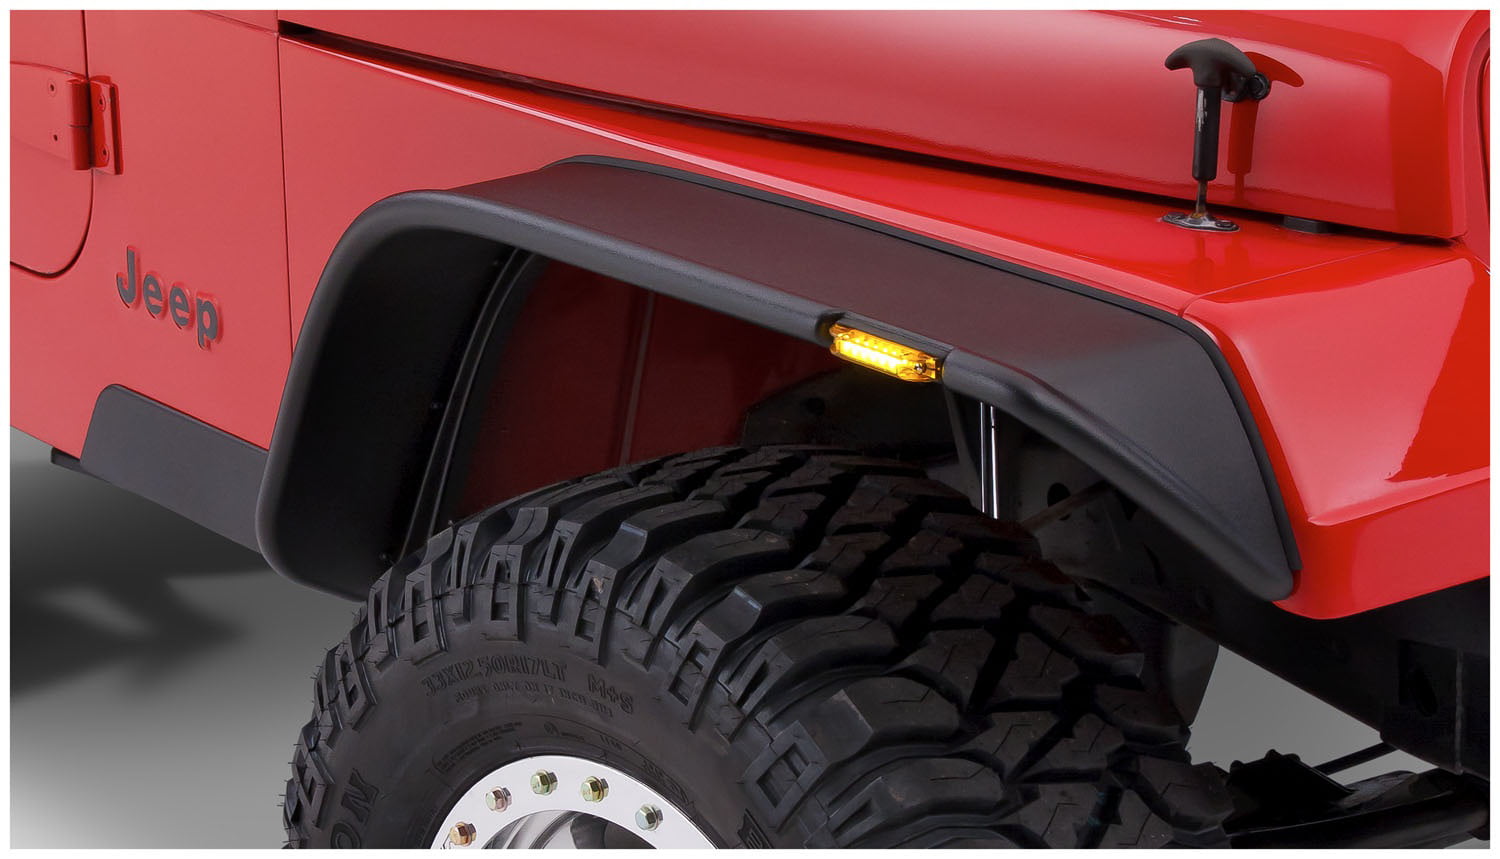 Bushwacker 10067-07 Black Jeep Flat Style Textured Finish Front Fender  Flares for 1987-1995 Jeep Wrangler YJ (Excludes Renegade) 